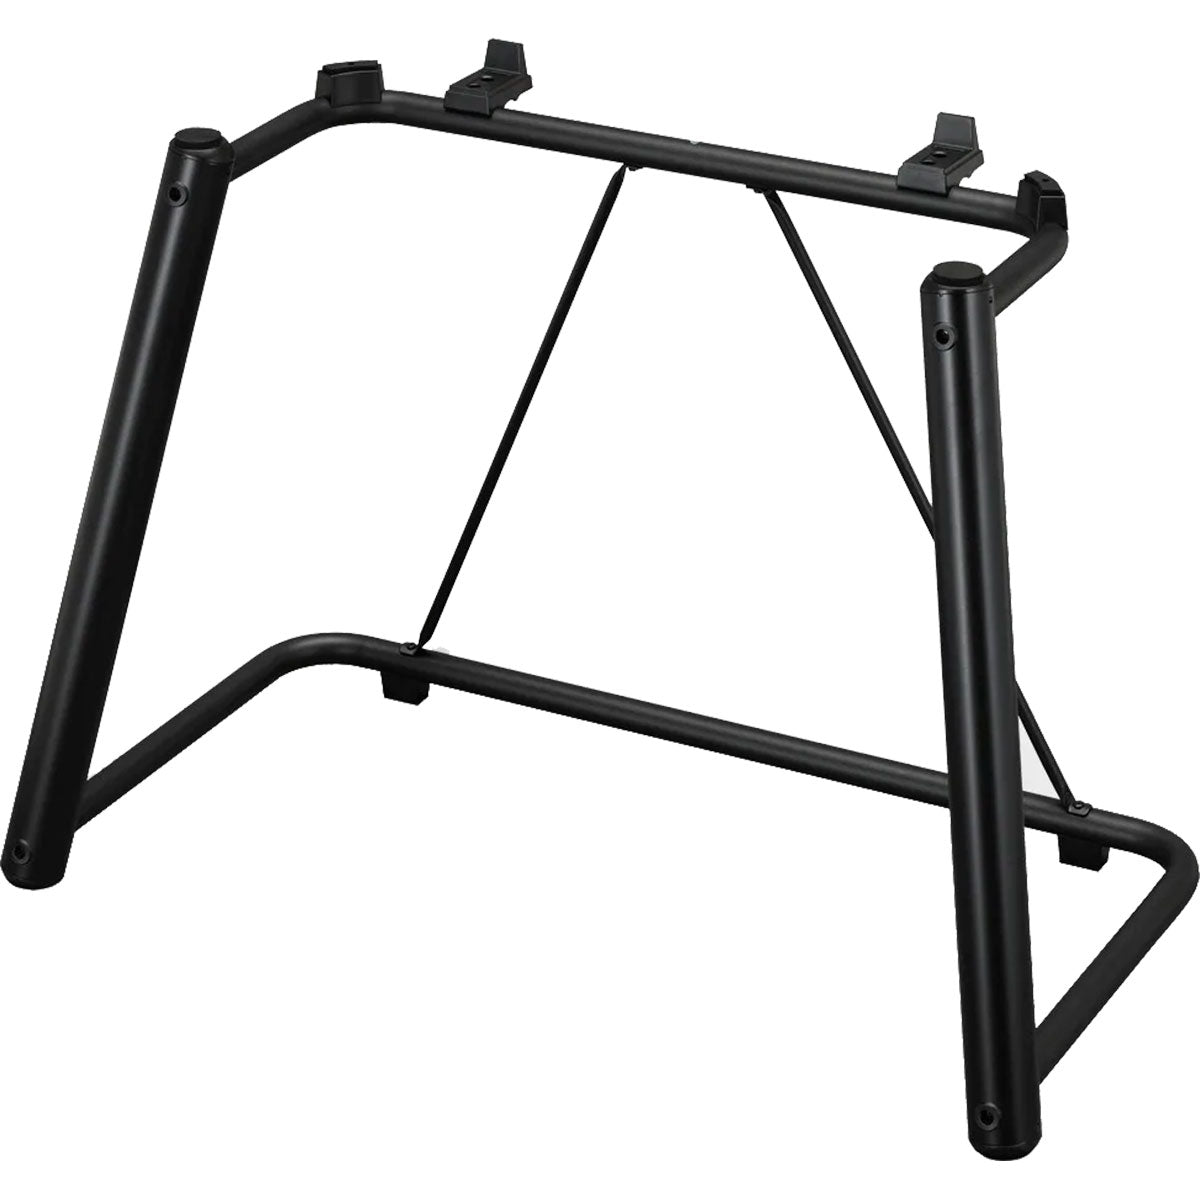 3/4 image of Yamaha L-7B Keyboard Stand showing front, top and right side